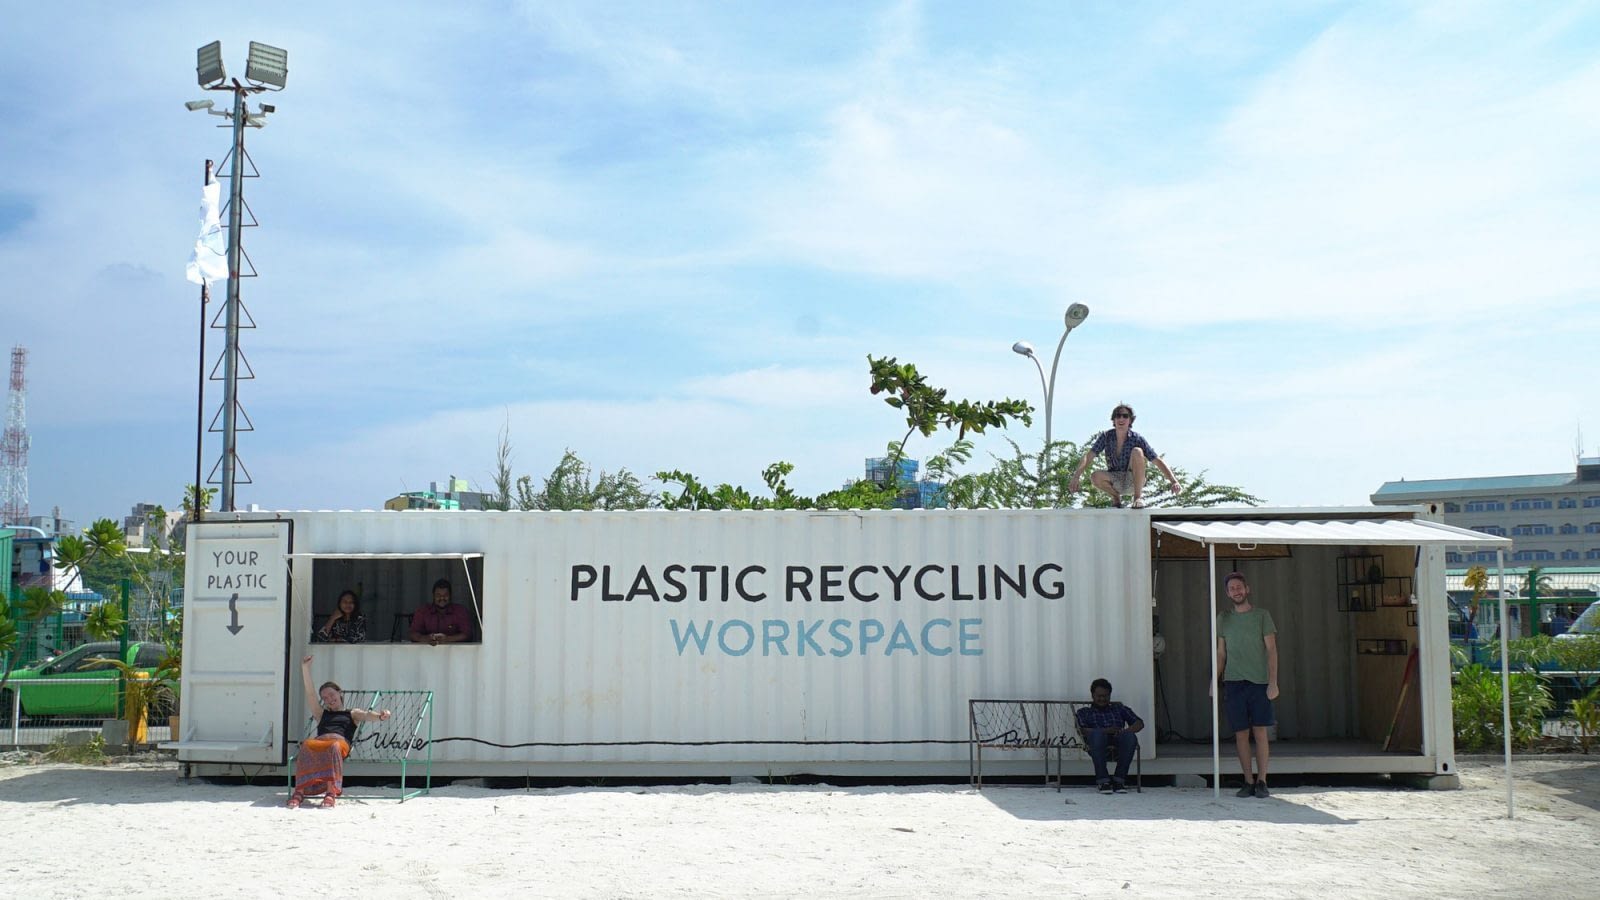 Image: Precious Plastic team members with the plastic recycling workspace in the Maldives